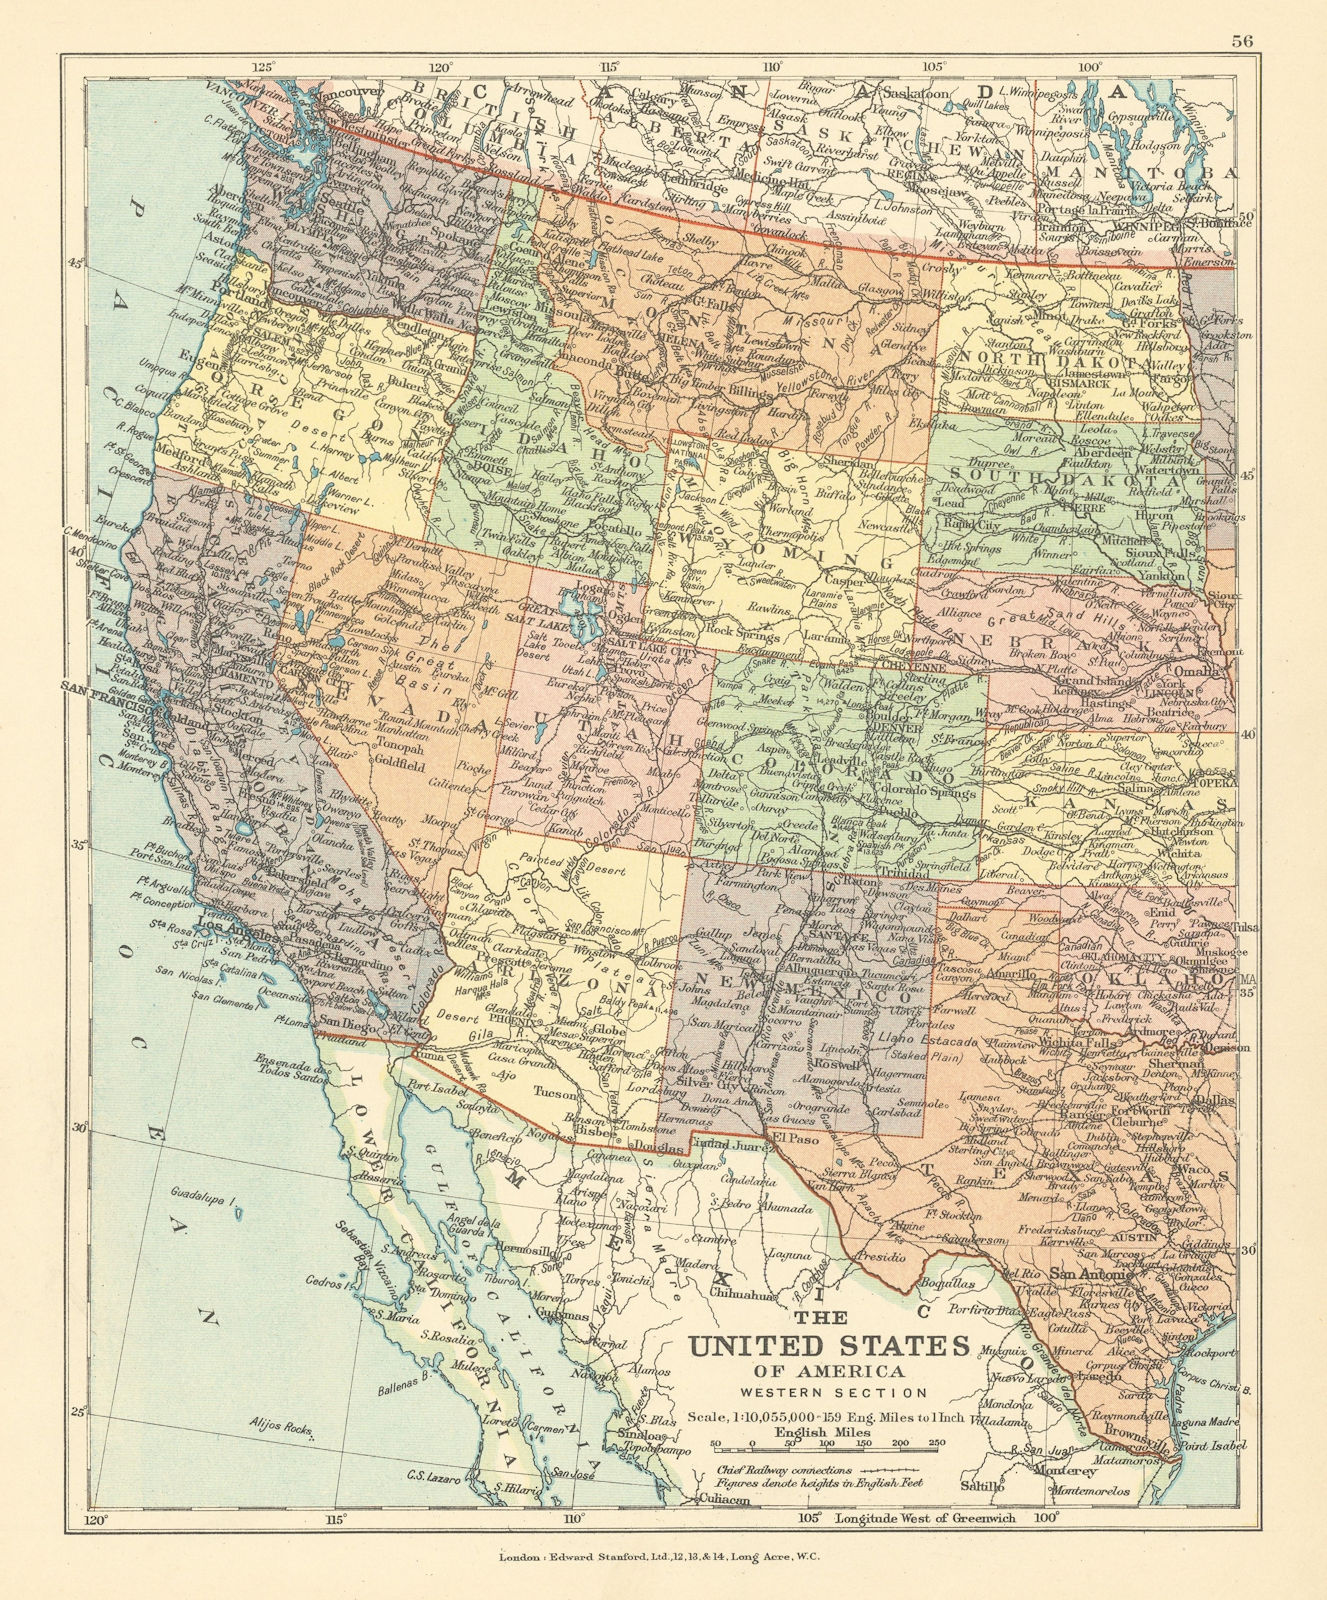 United States of America, Western Section. USA. STANFORD c1925 old vintage map